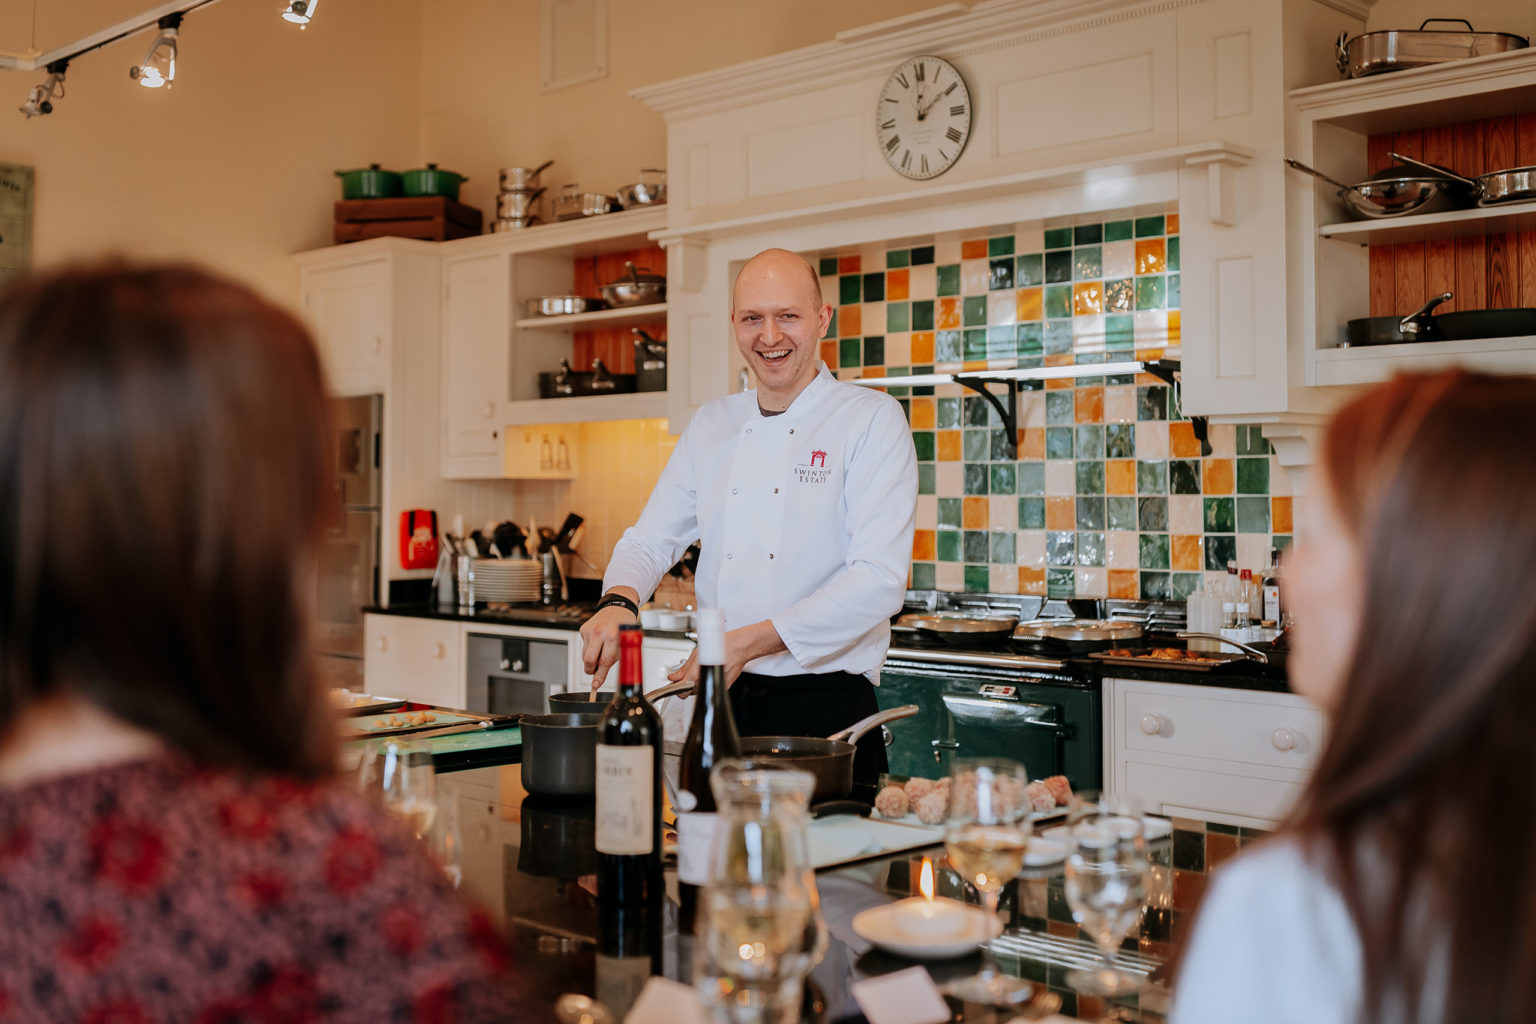 A smiling chef cooks in front of guests during a gourmet Chef's Table experience at Swinton Estate near Harrogate in North Yorkshire